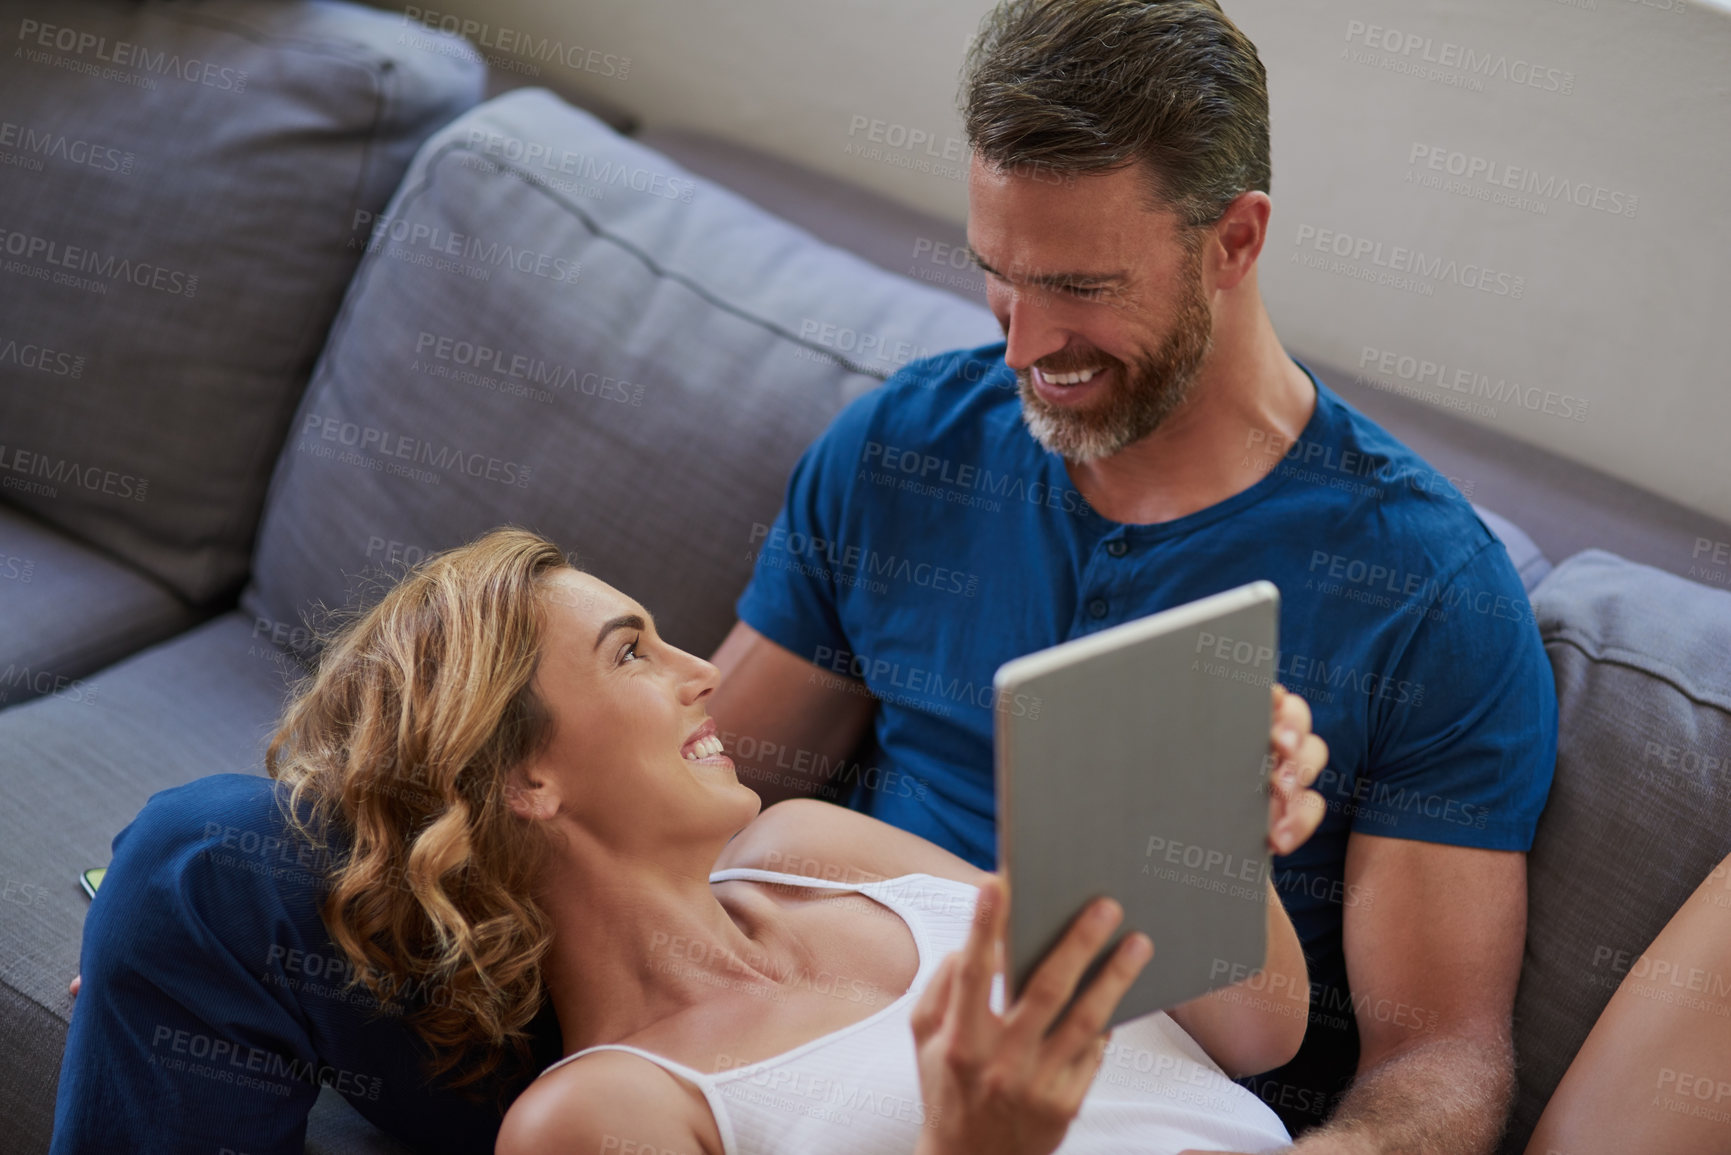 Buy stock photo Shot of a happy middle aged couple using a digital tablet together on the sofa at home